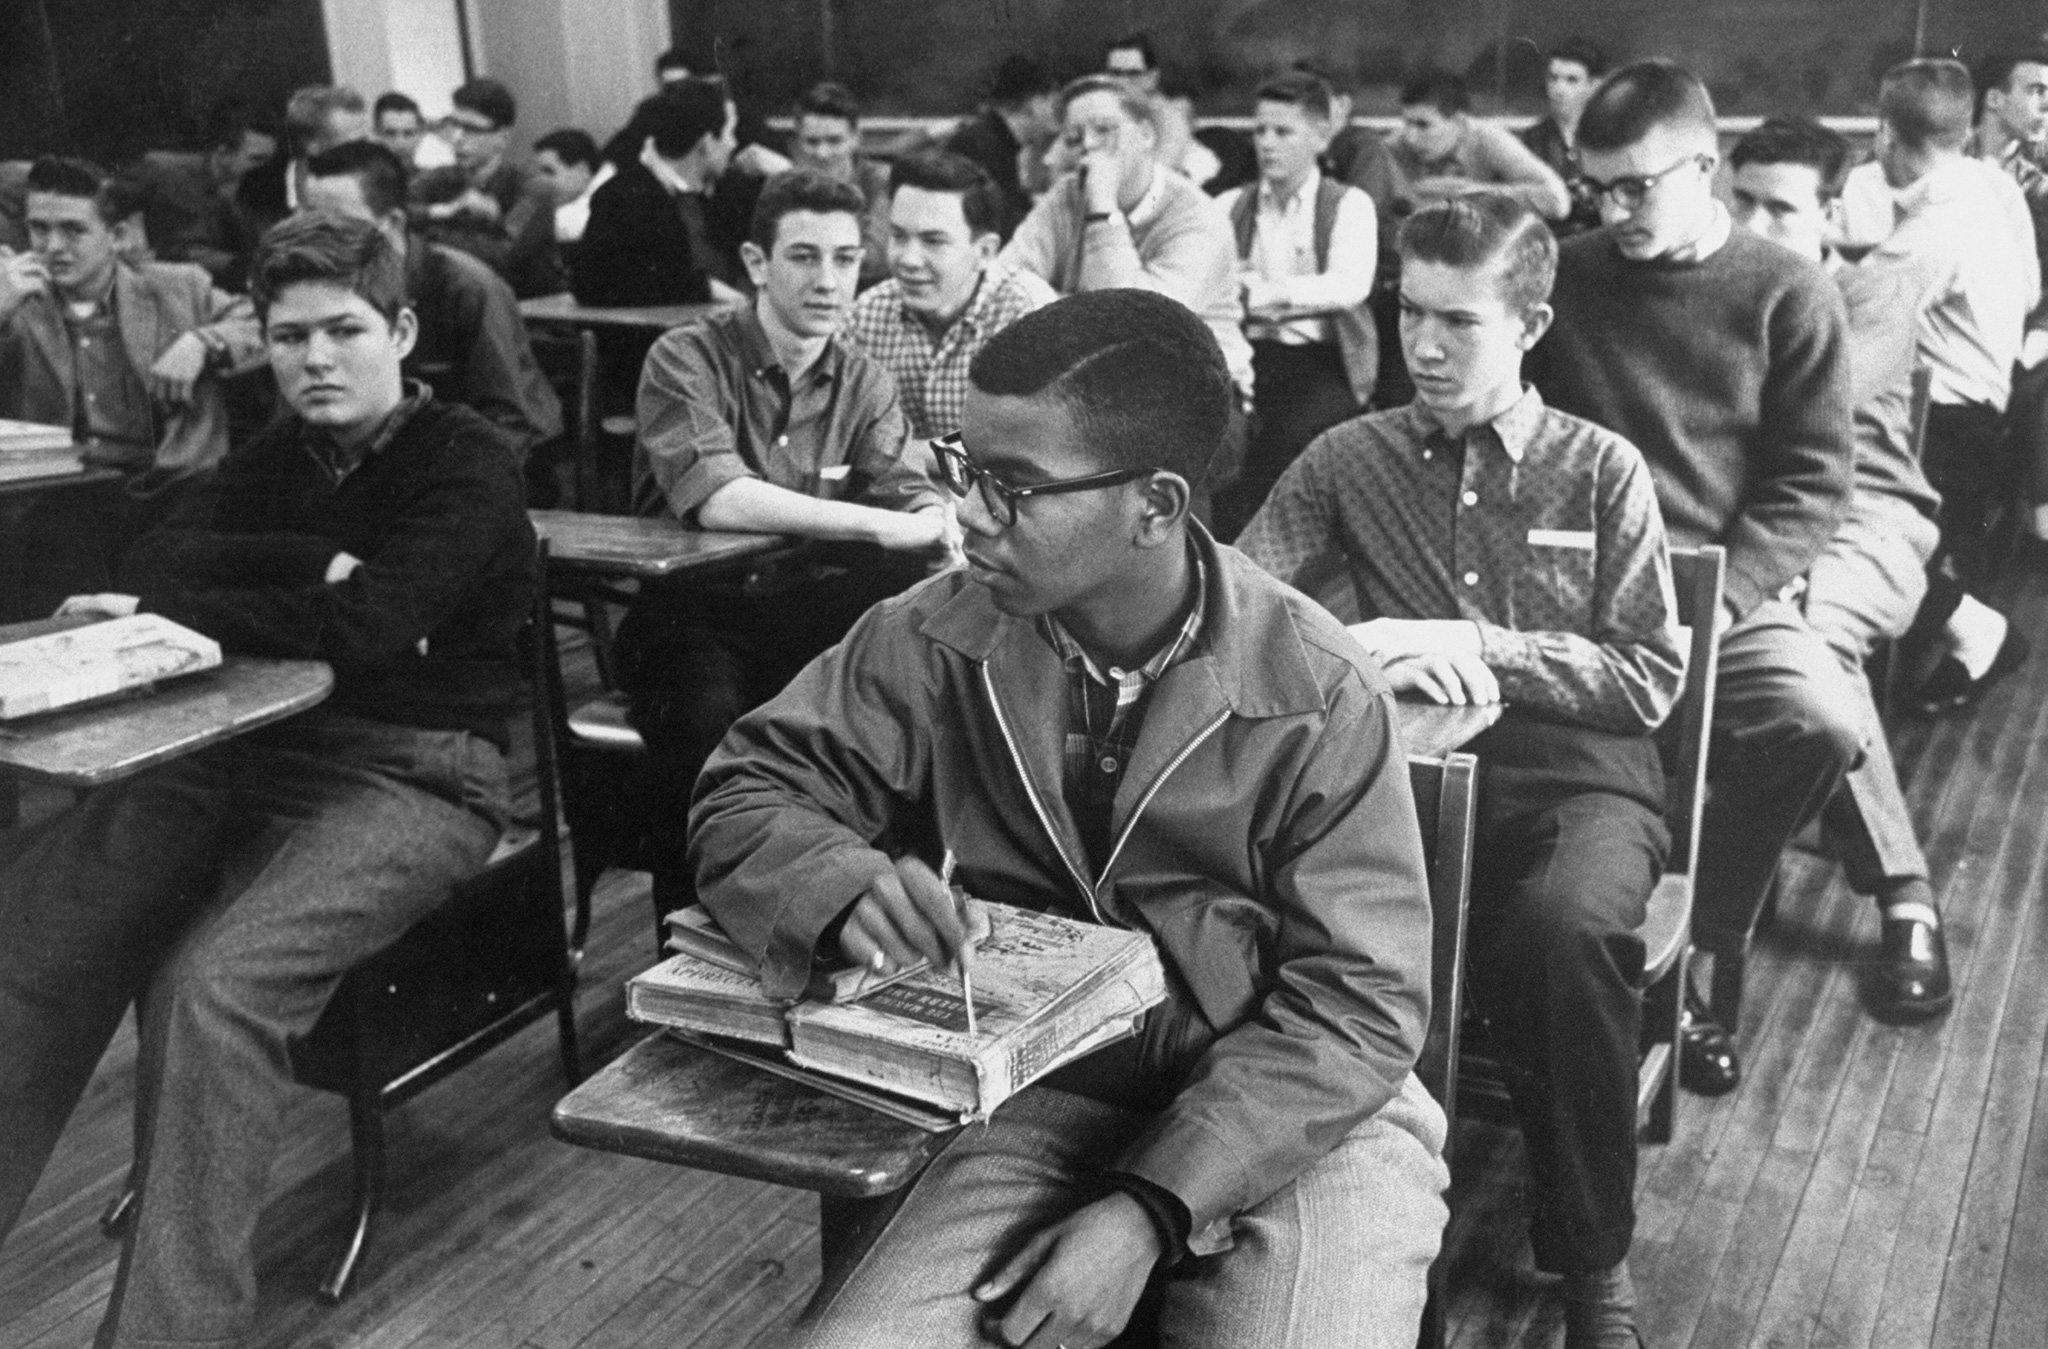 Lewis Cousins (C) sits in class surrounded by white students. Cousins was the first black student to attend the newly desegregated Maury High School in Norfolk, Va, 1959.